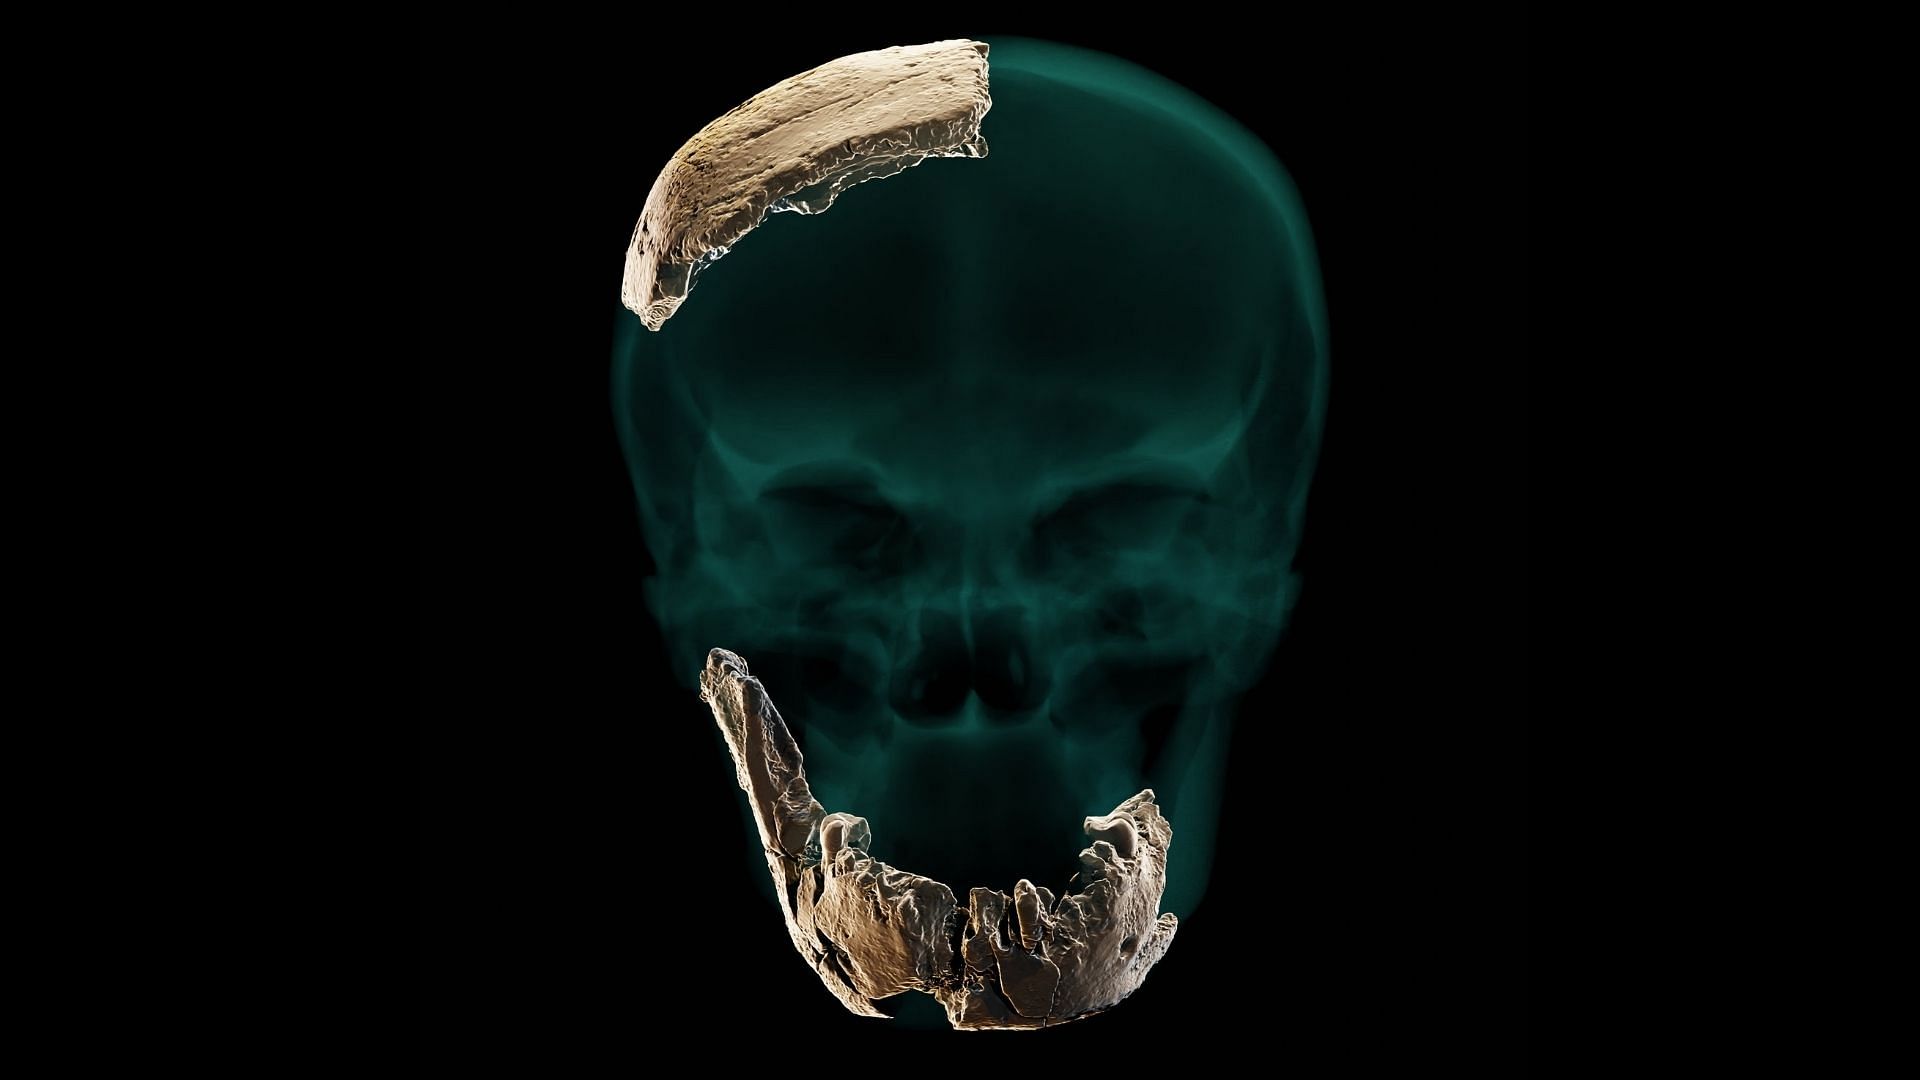 Tel Avil scientists have found fragments of a skull and lower jaw with teeth, which date back to about 1,30,000 years ago.